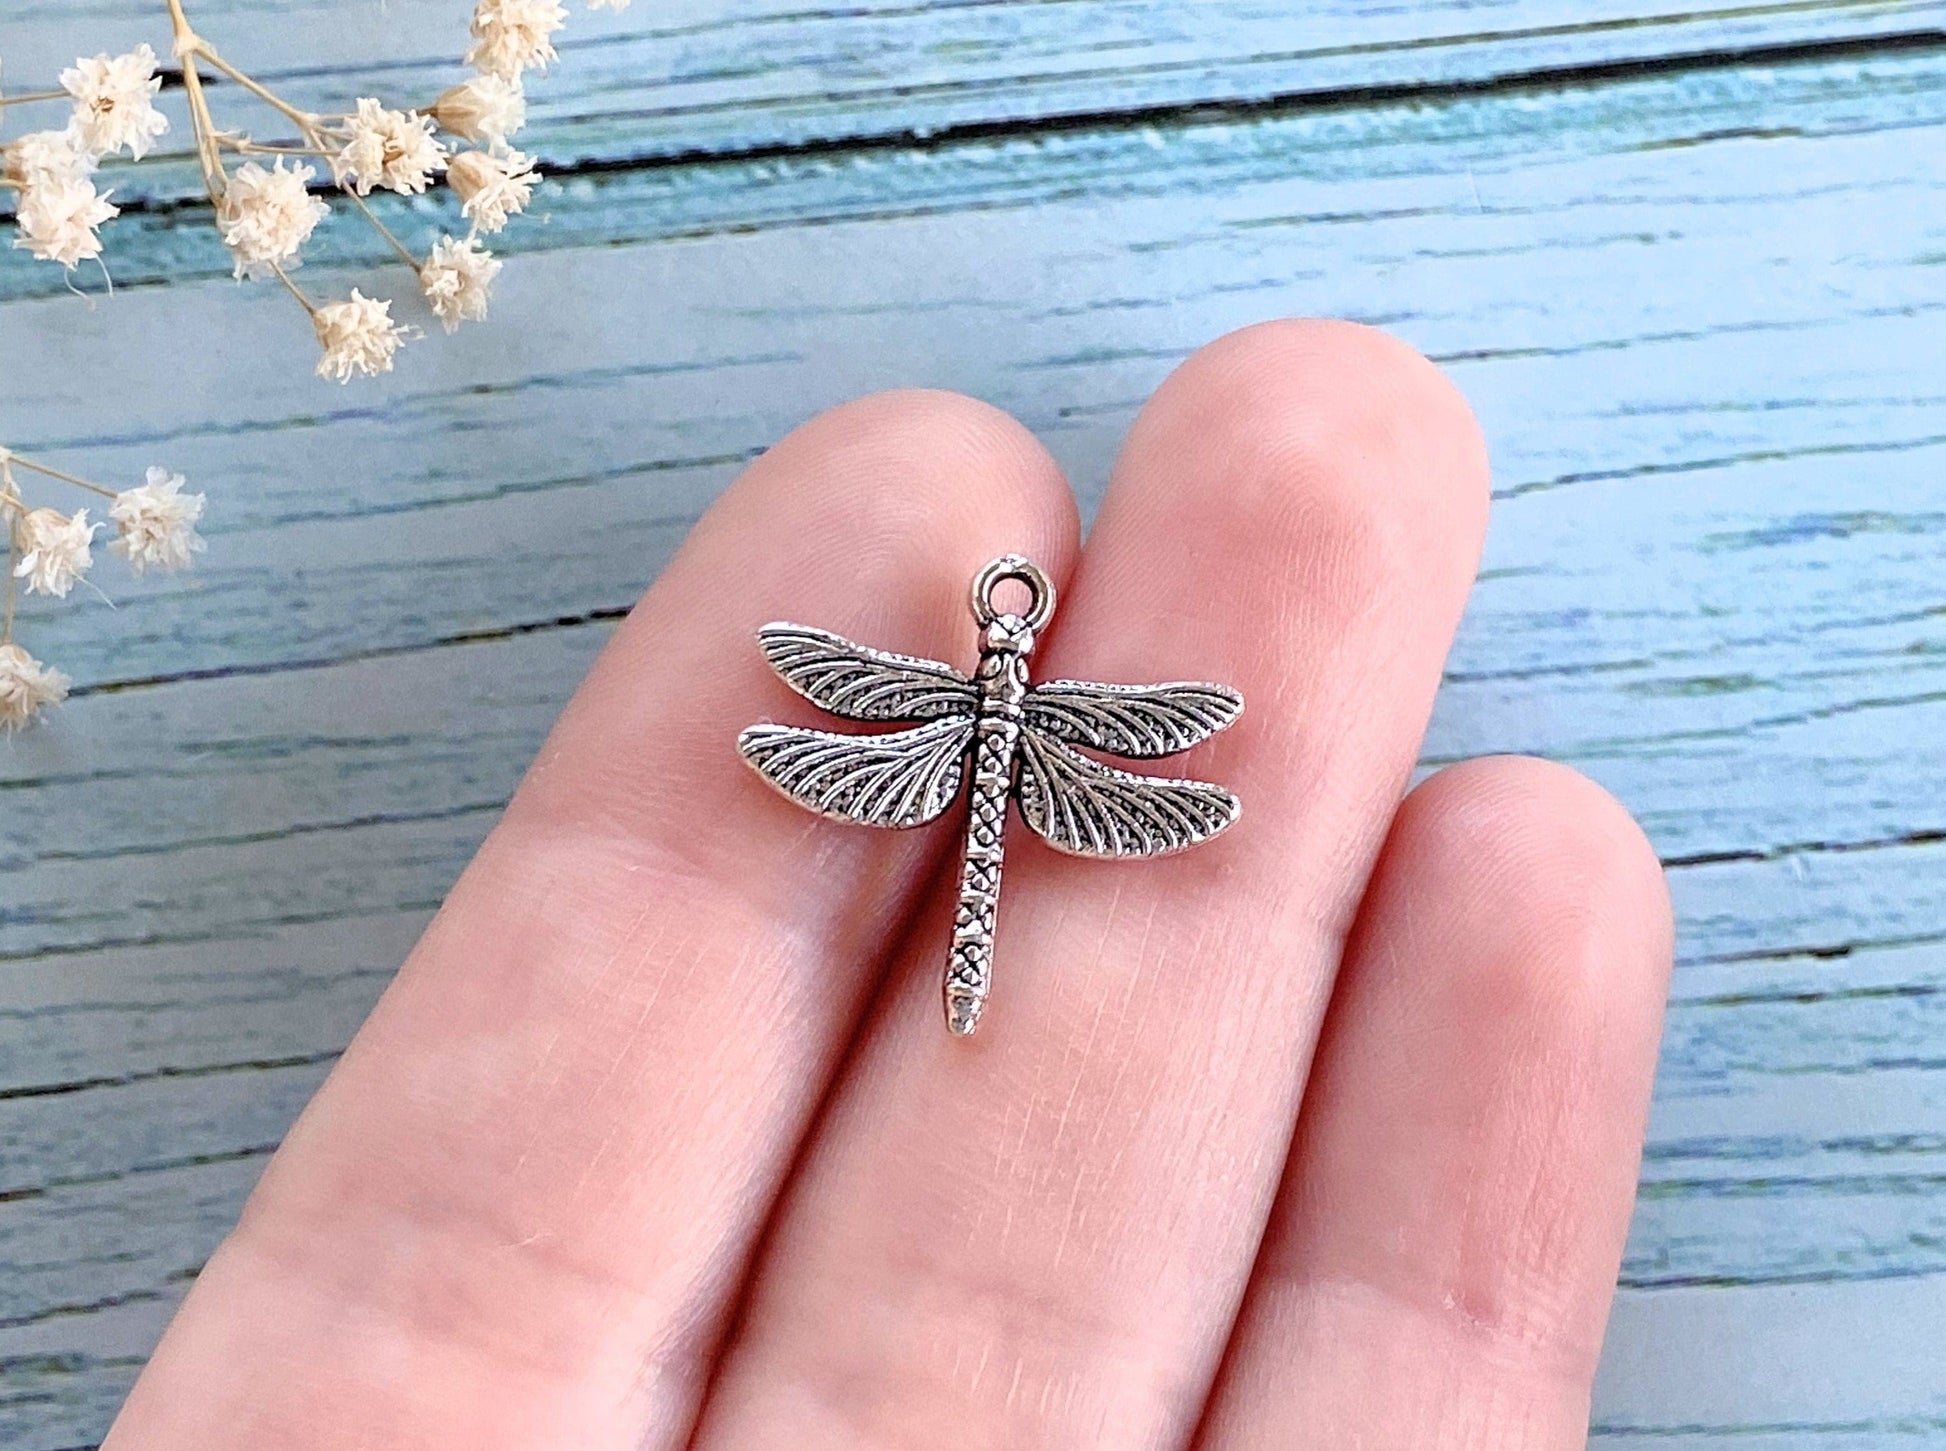 Charm Pendant 5pcs Vintage Dragonfly Components for Crafts Vialysa